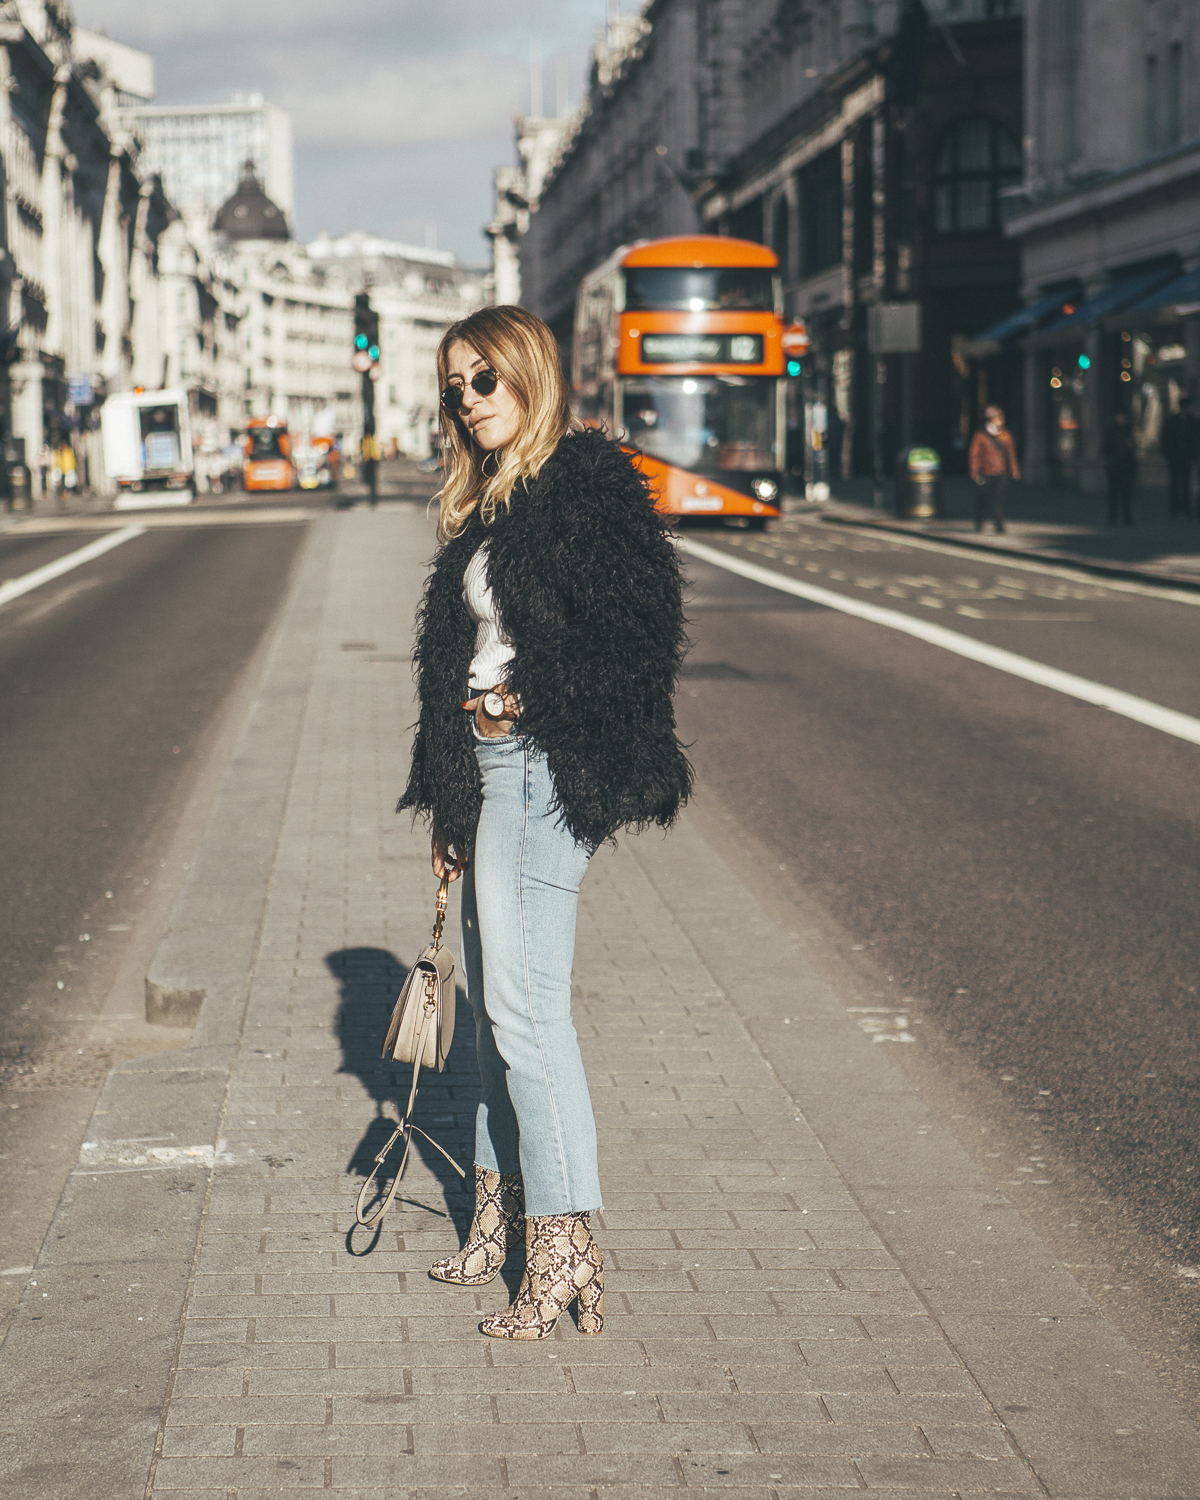 Regent-Street-4 The easiest way to change your wardrobe from winter to spring